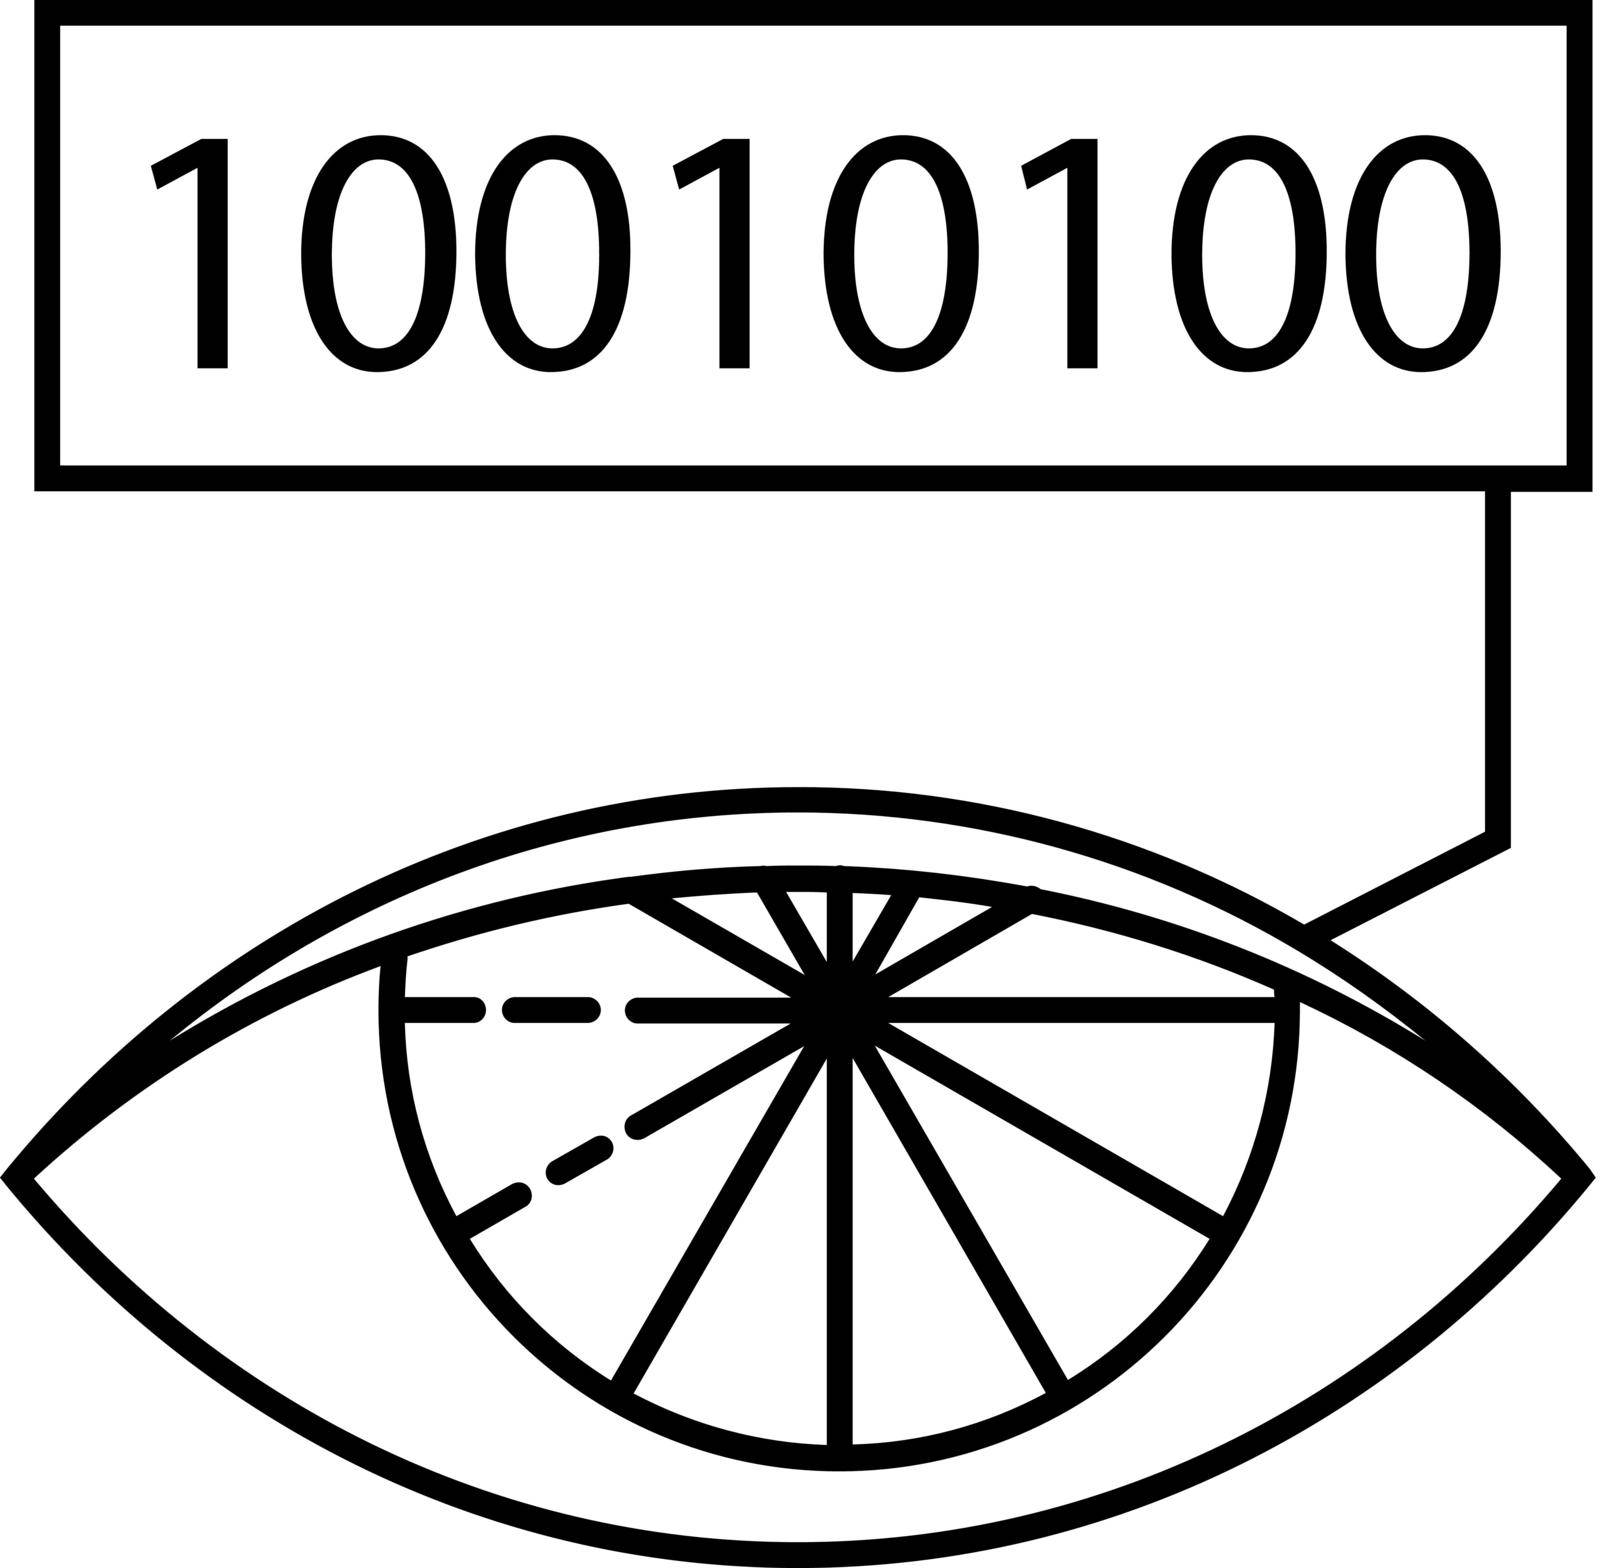 Retina based surveillance icon in thin outline. by puruan